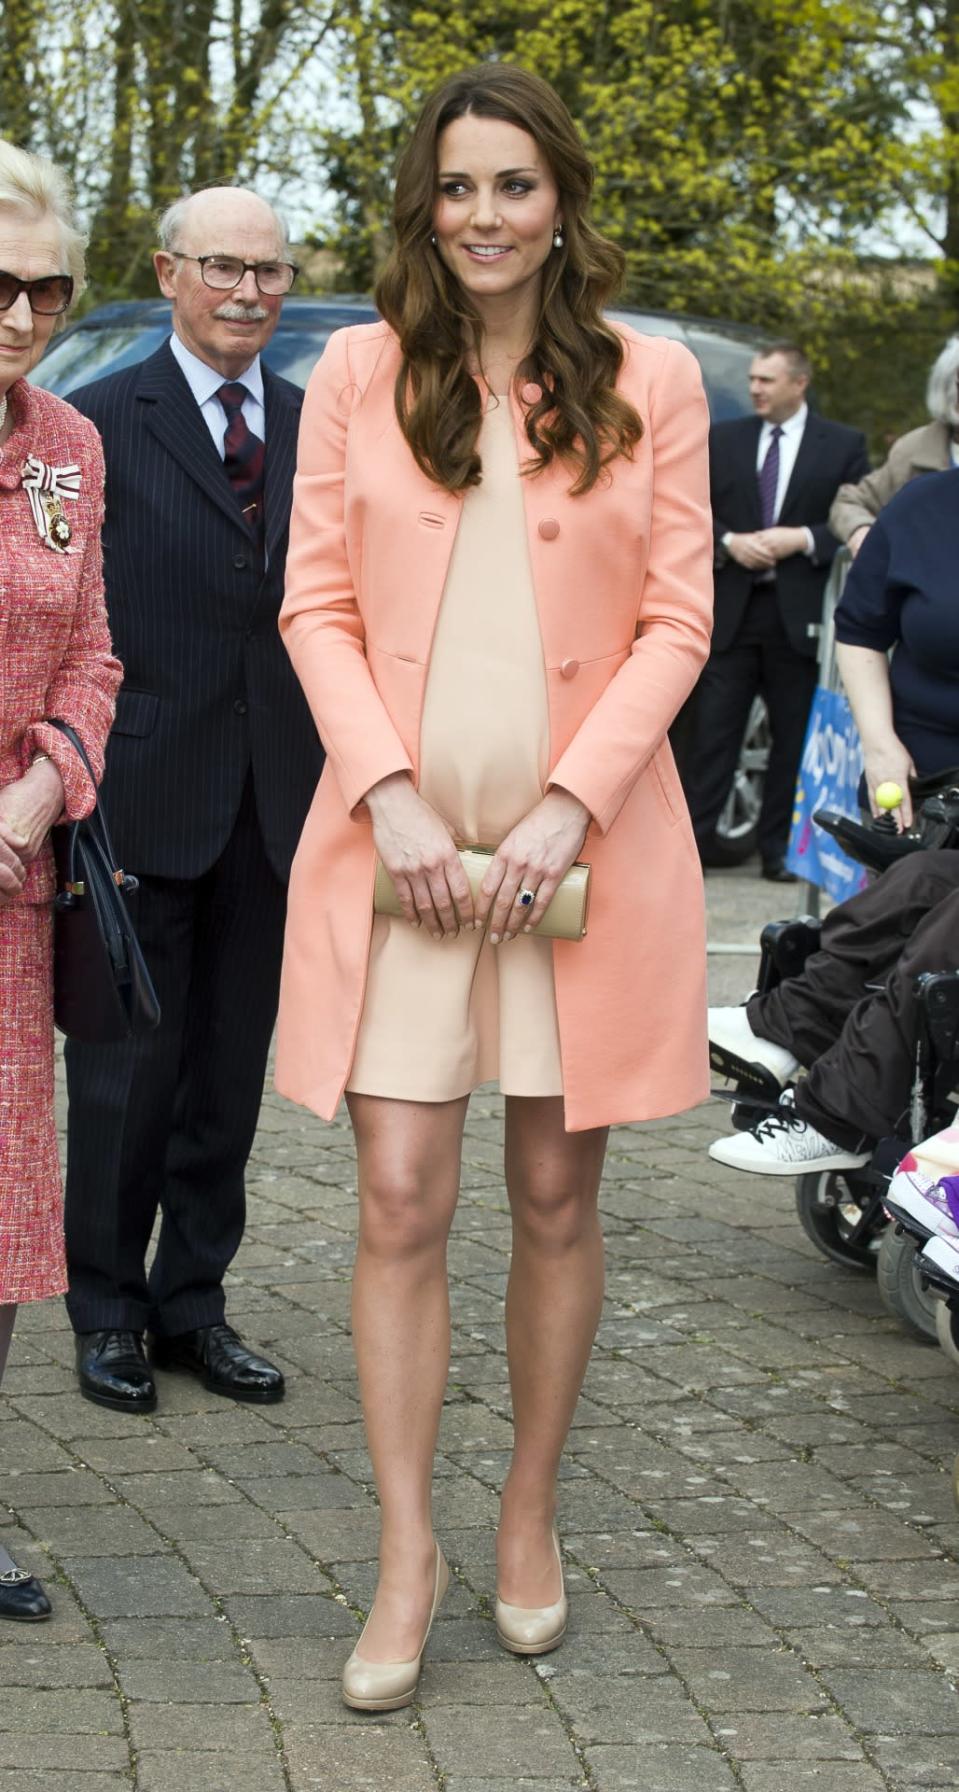 Meeting with terminally ill children and young adults at the Naomi House Children’s Hospice, Middleton wore a peach coat by Tara Jarmon with LK Bennett pumps and a custom-made dress.